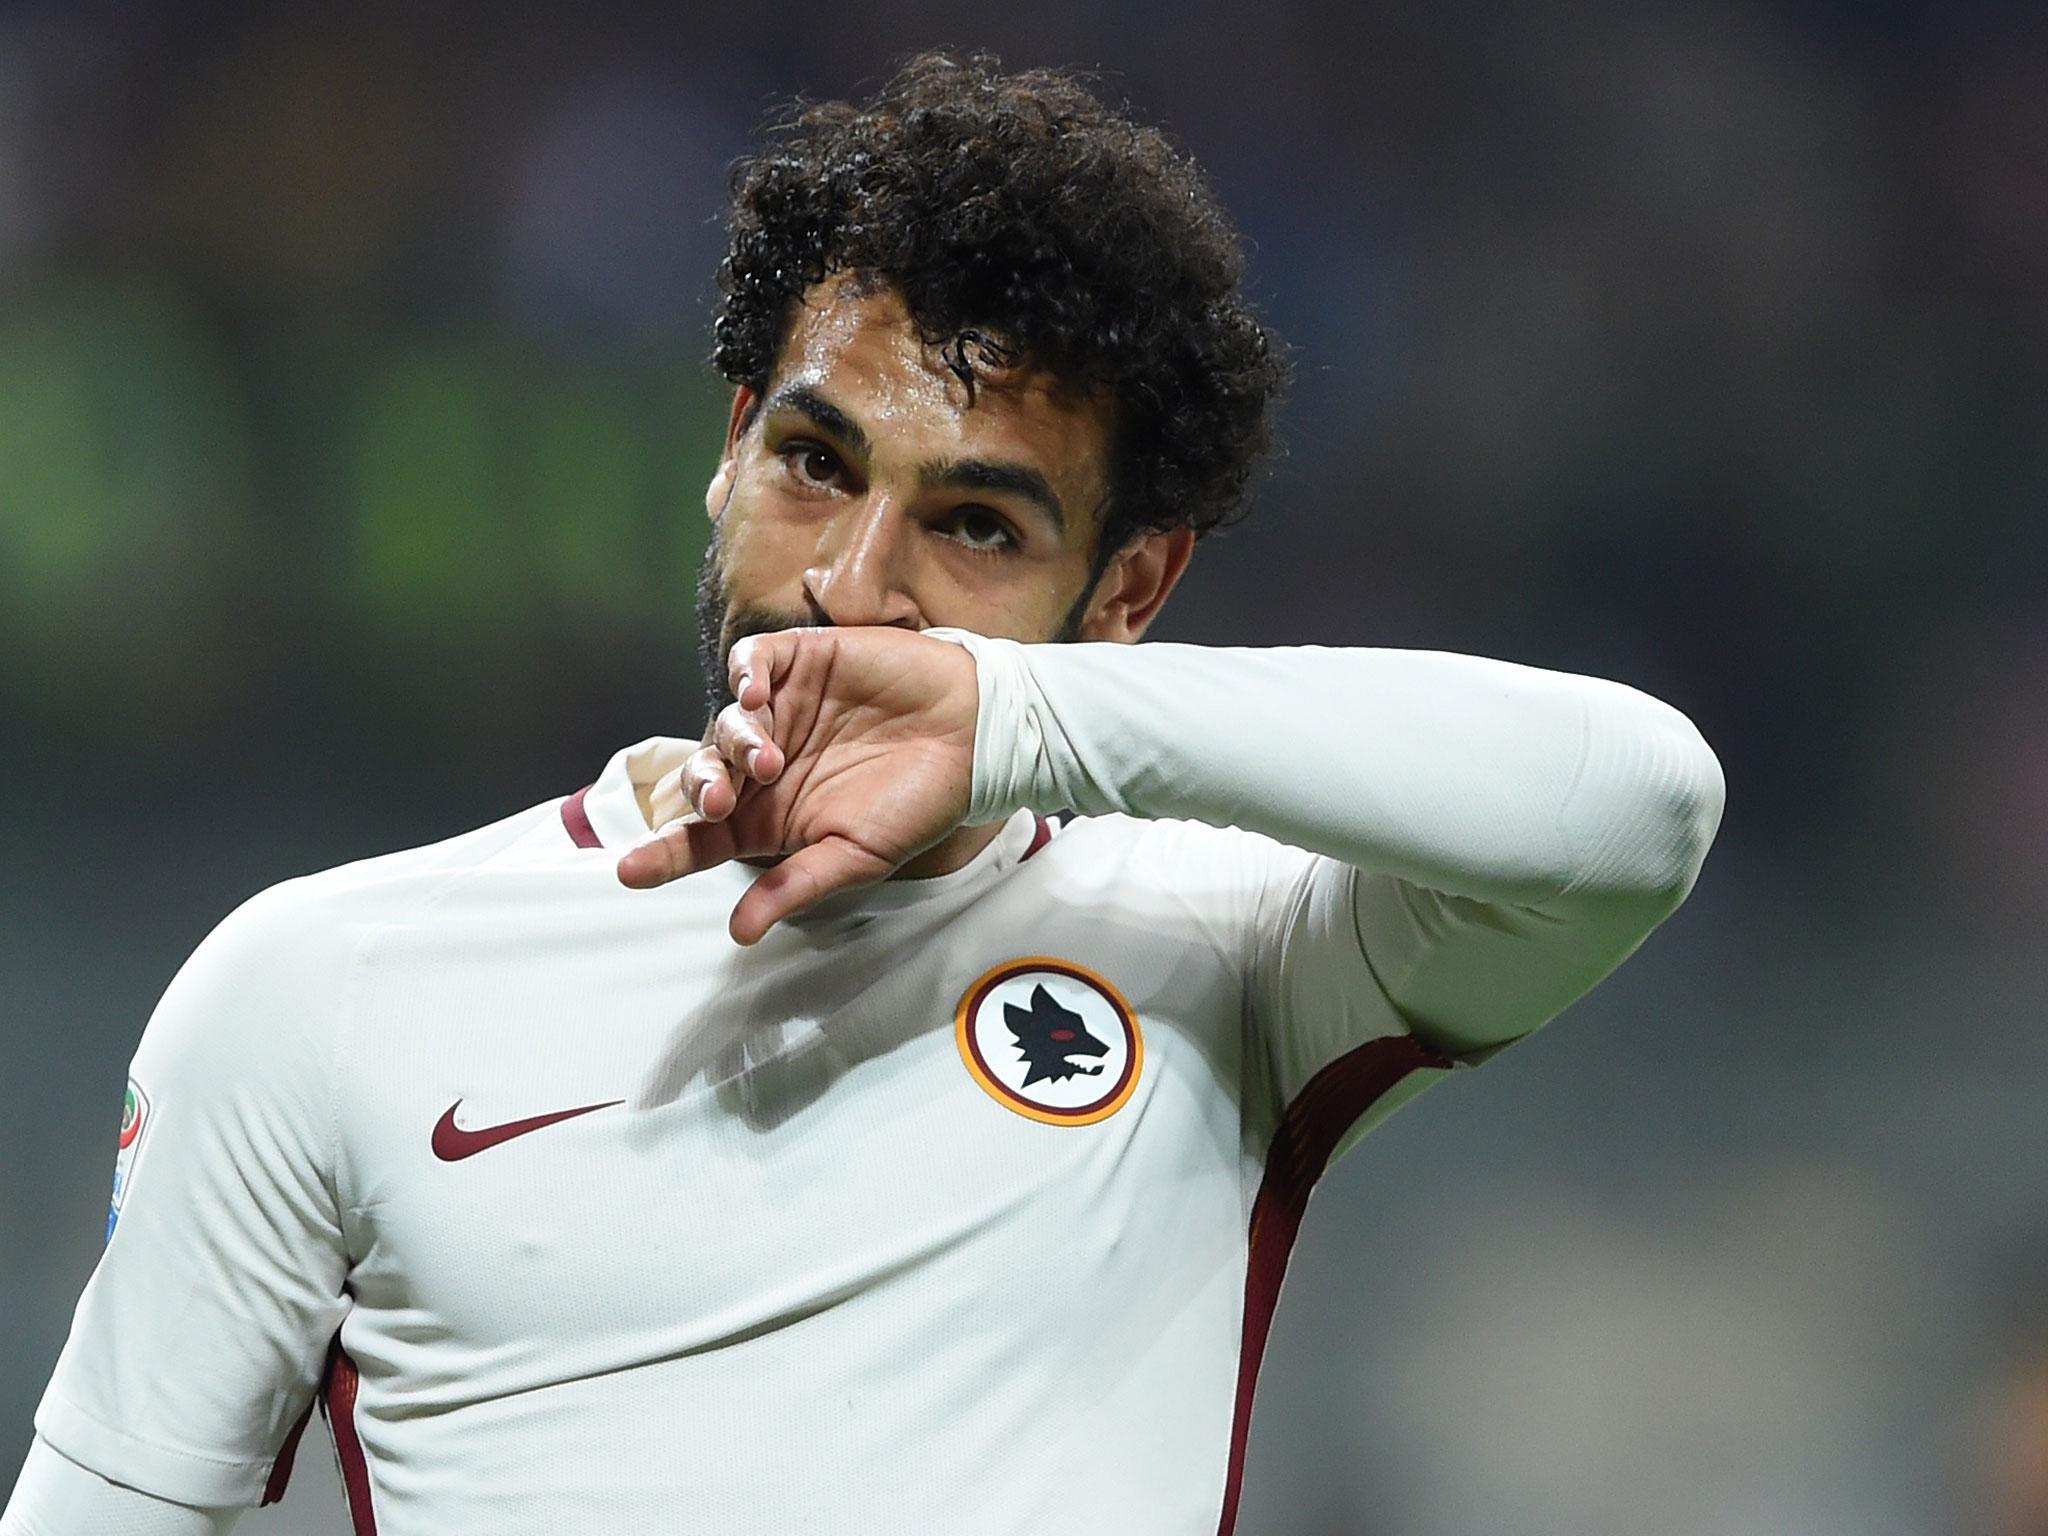 Liverpool are keen to add Mohamed Salah but Roma are standing firm